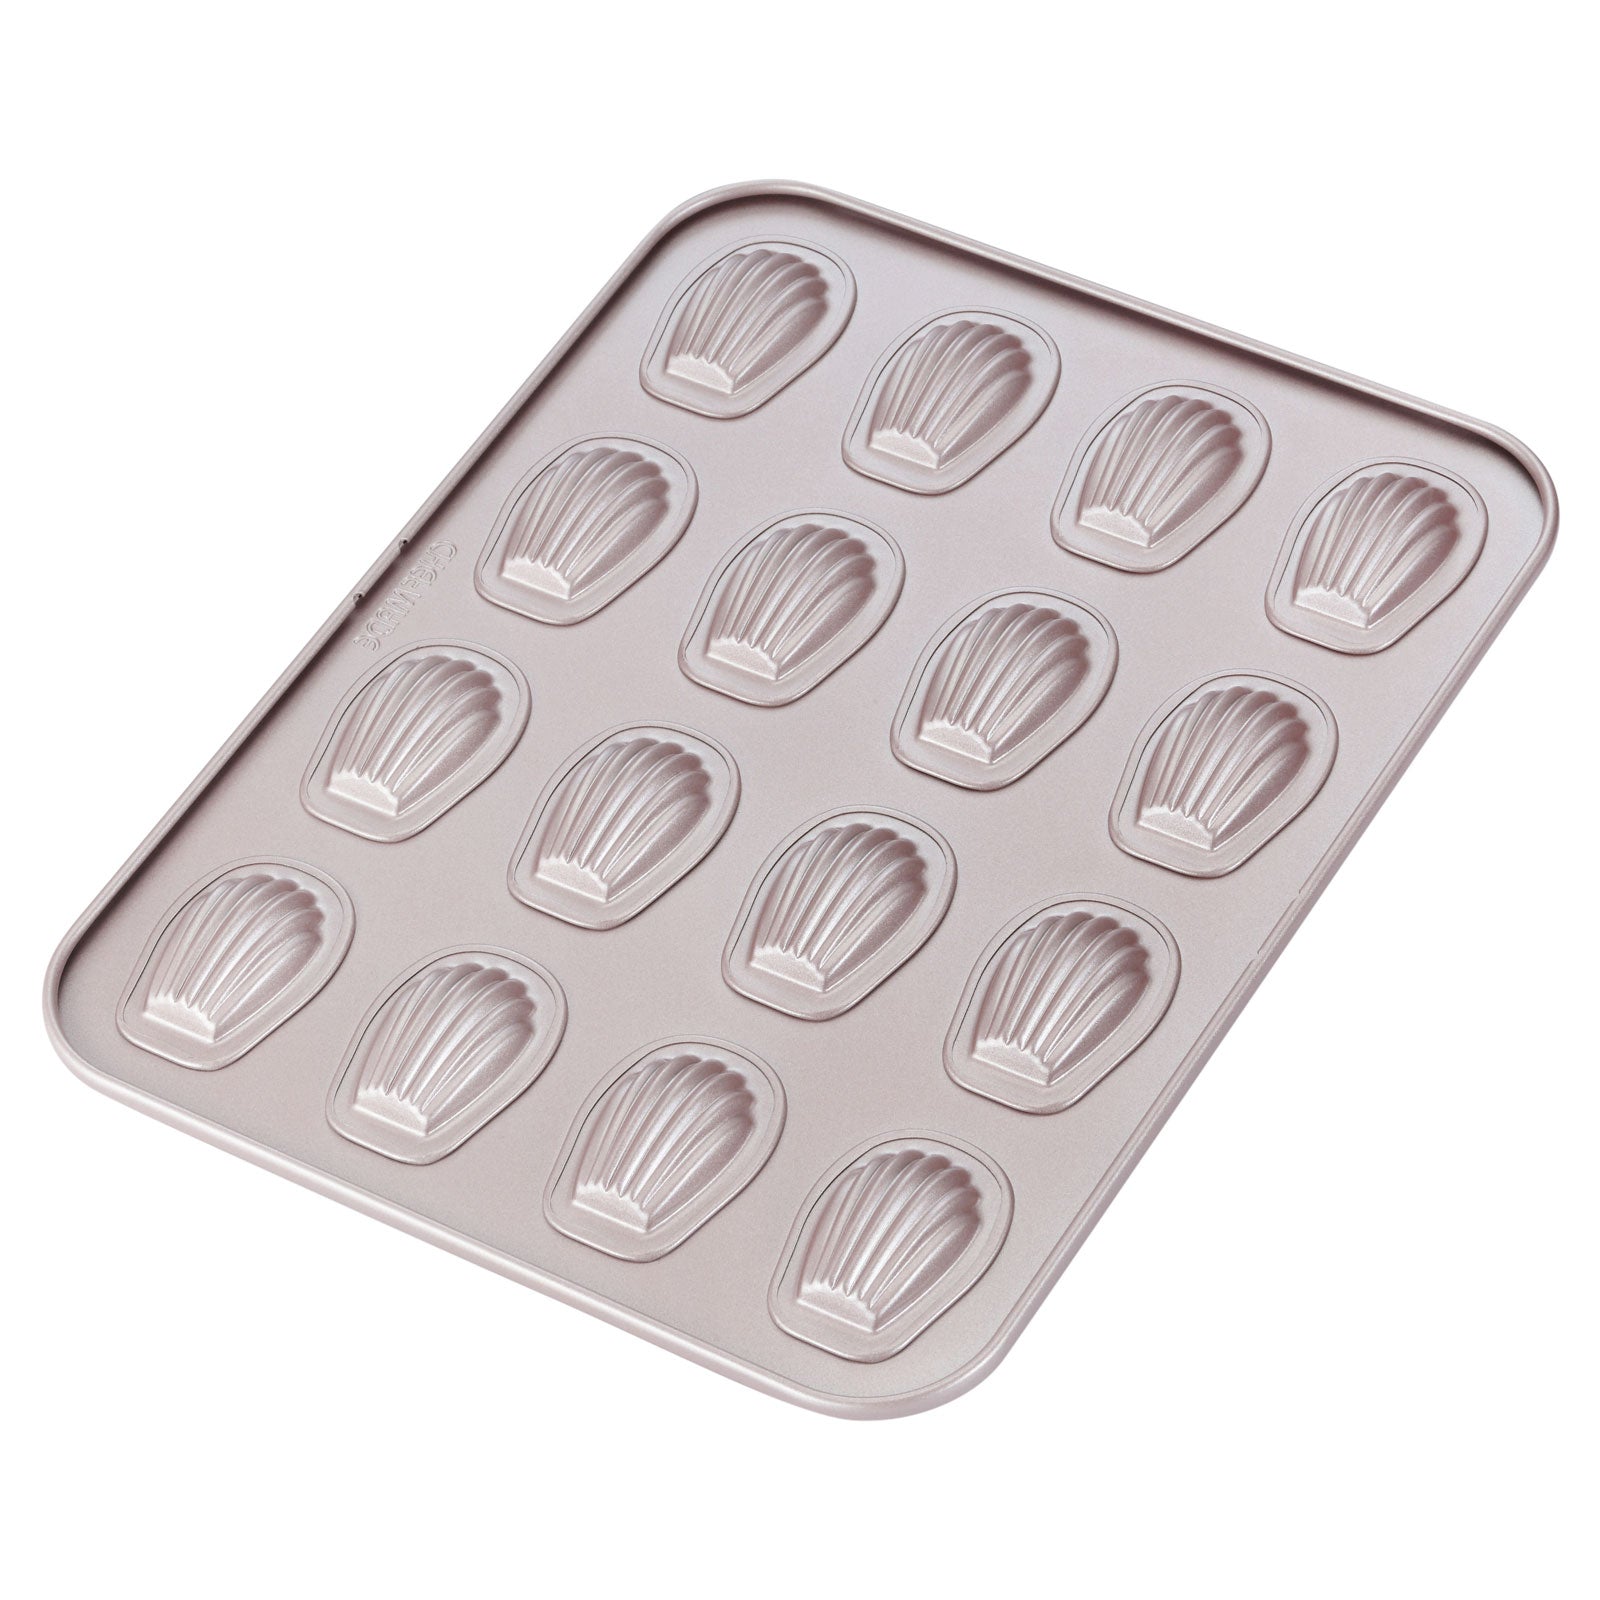 9 x 13 Baking Sheet - CHEFMADE official store